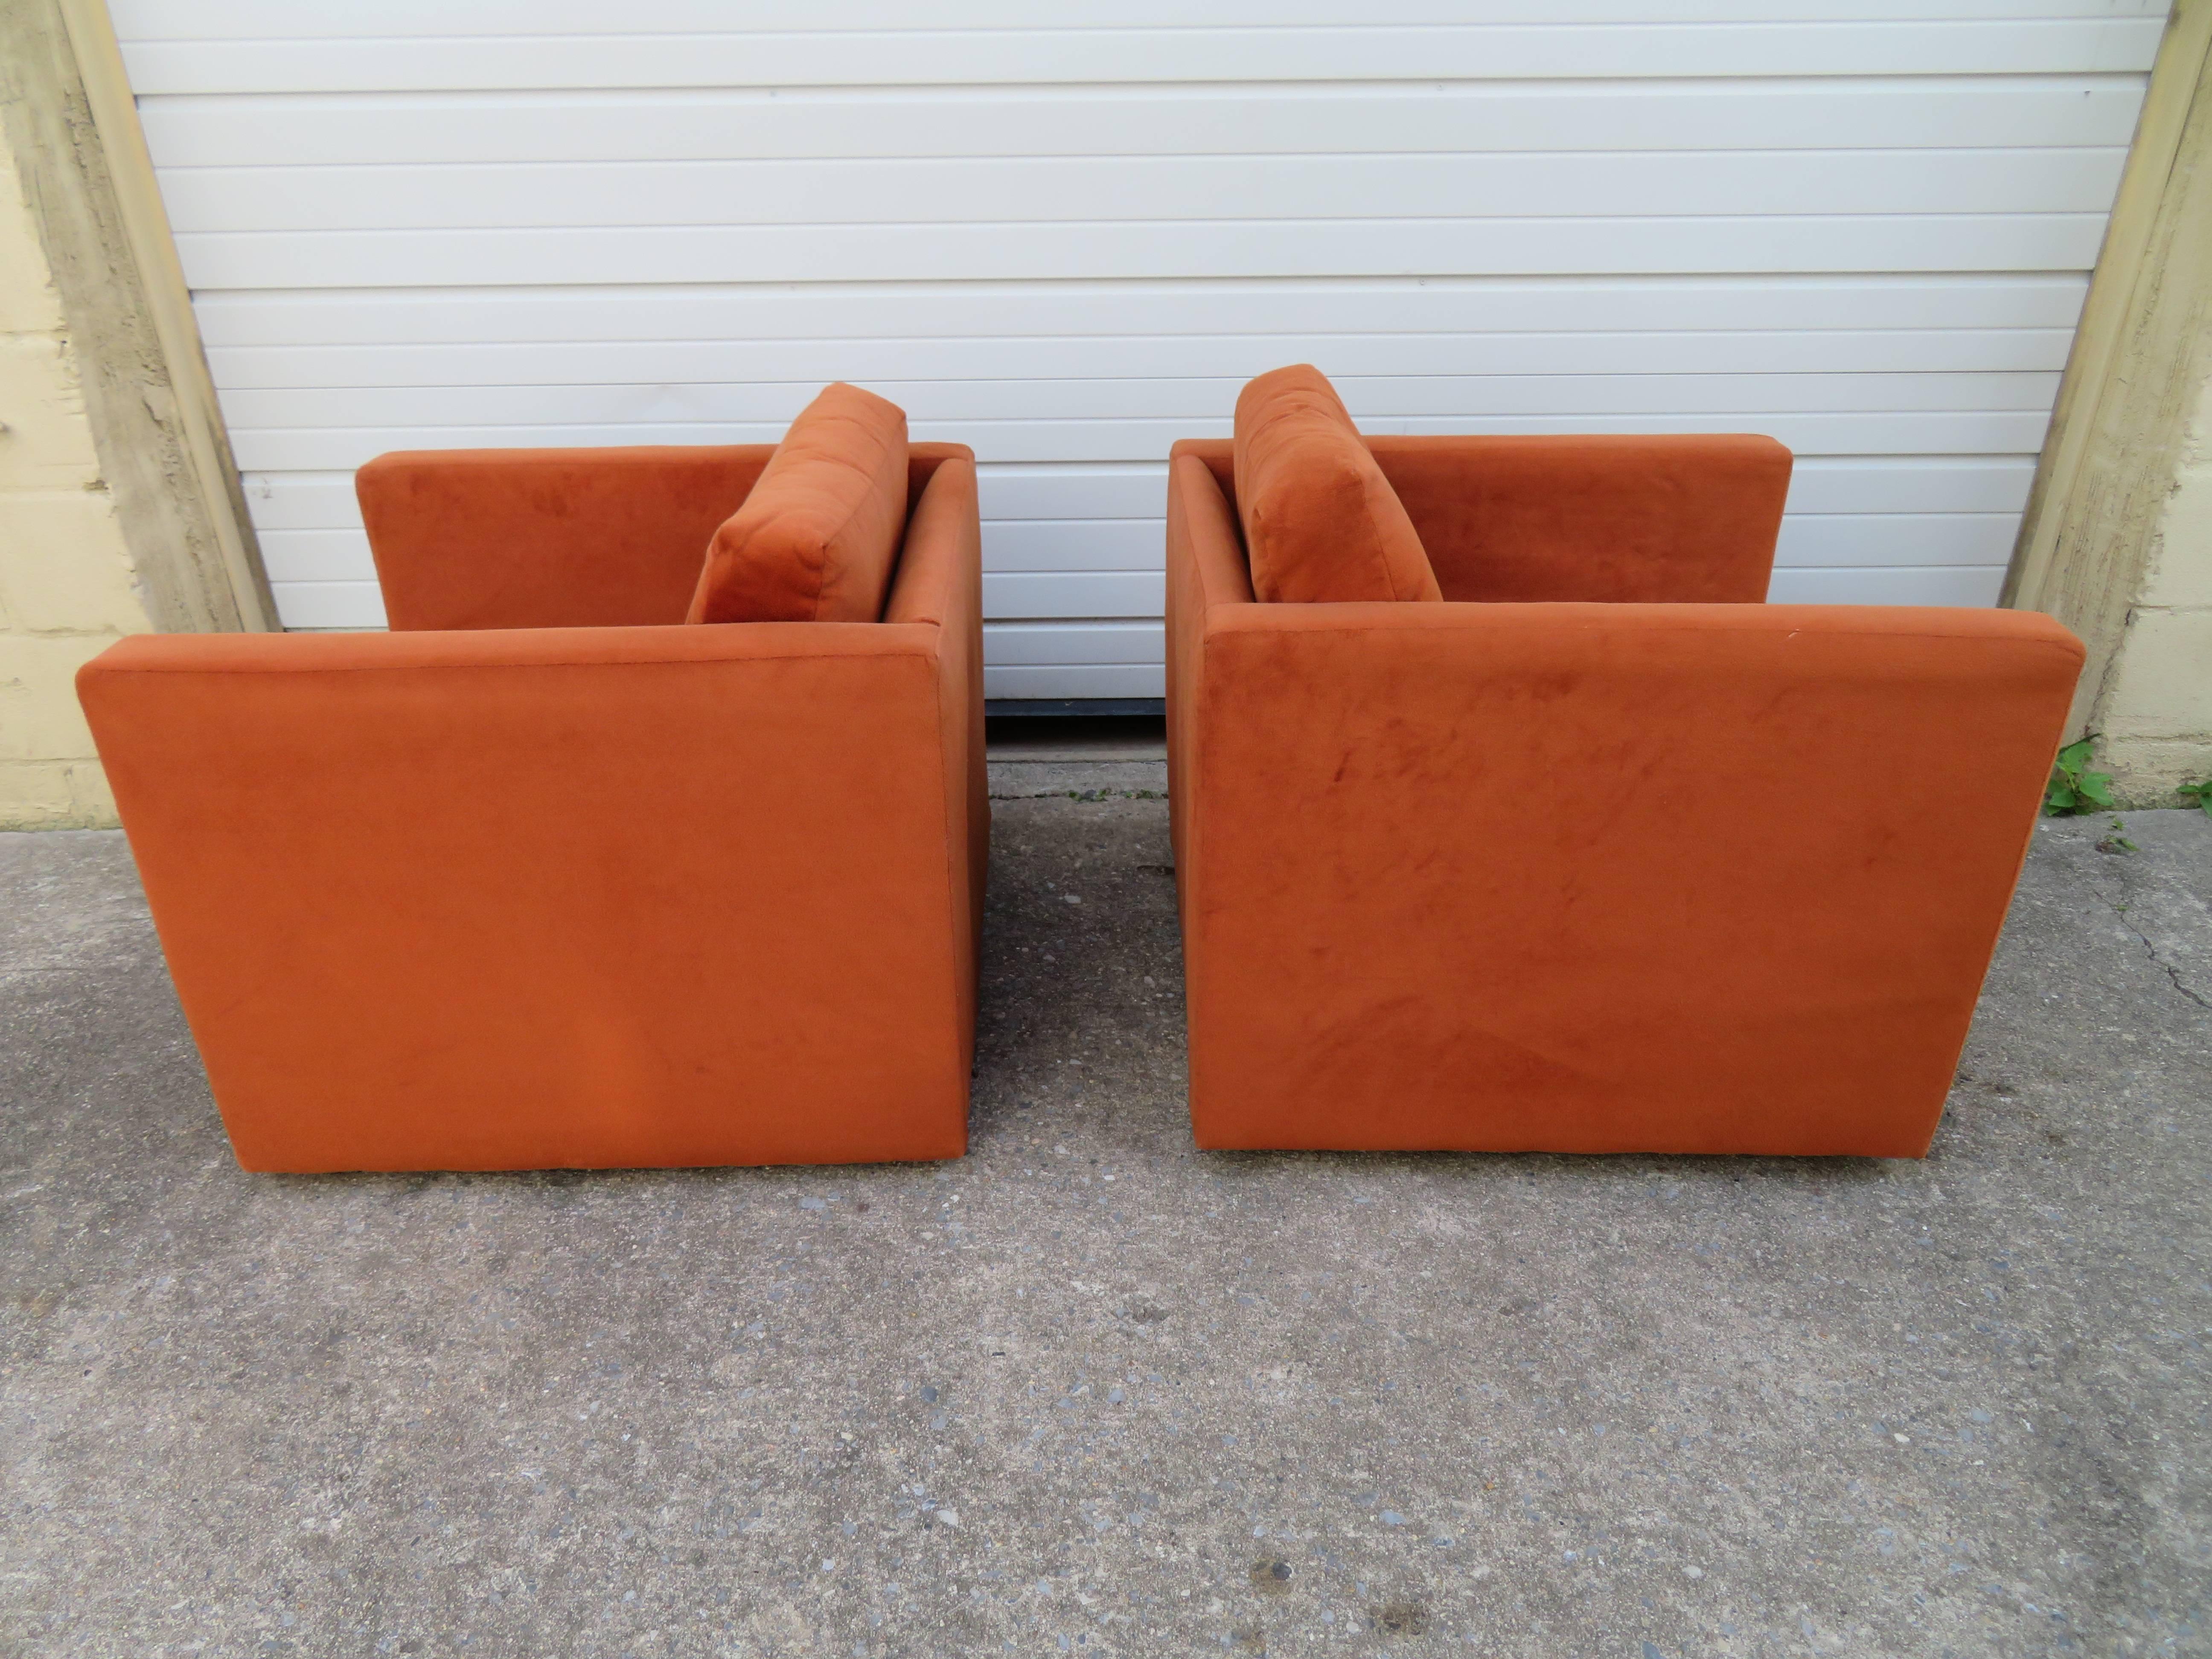 Upholstery Handsome Pair of Milo Baughman Thayer Coggin Cube Chairs Mid-Century Modern